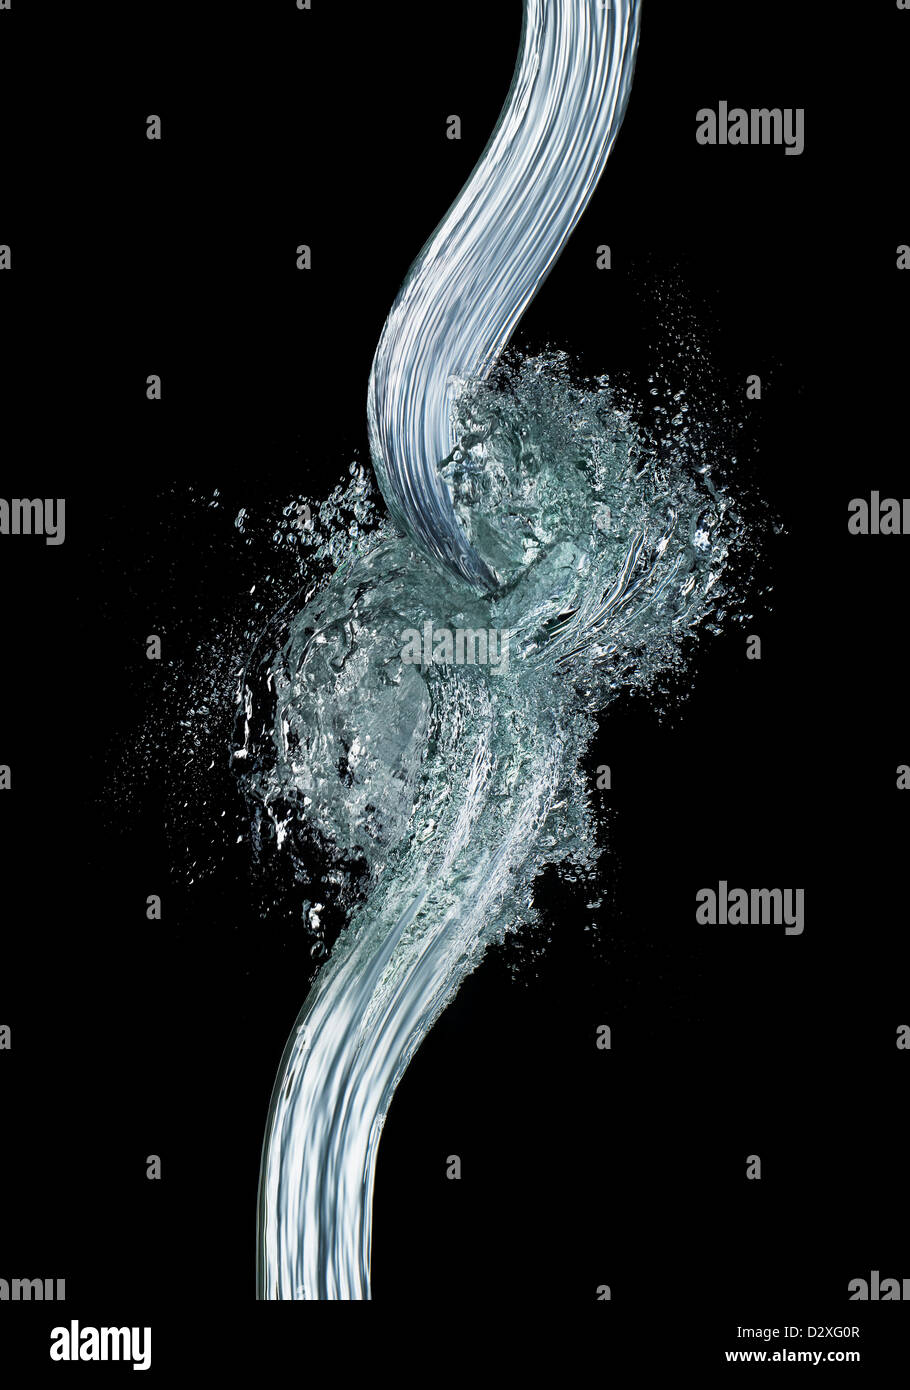 Wave pattern forming from water Stock Photo